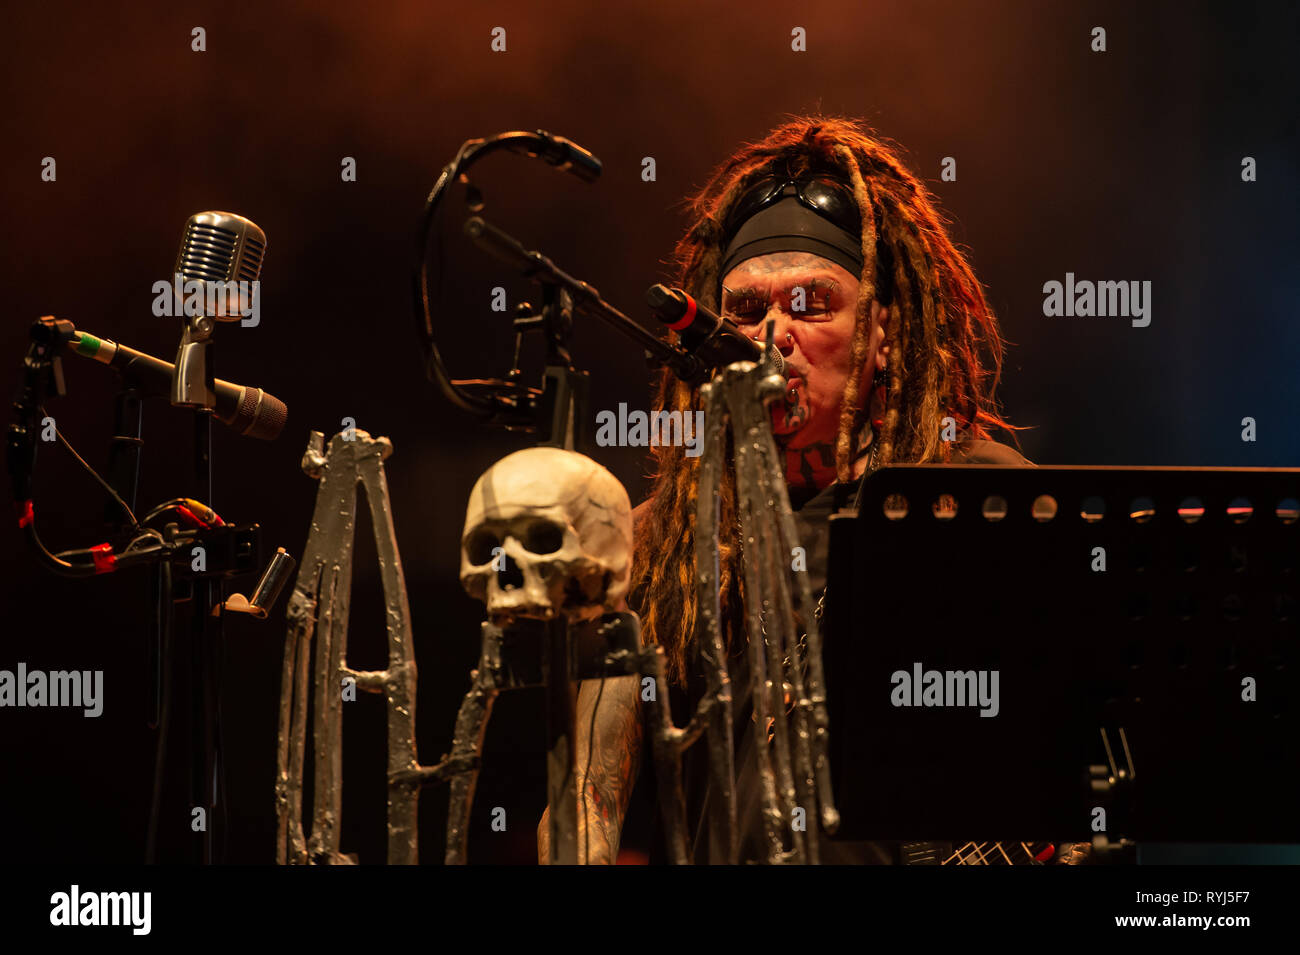 Al Jourgensen, singer, guitarist, keyboard player and leader of industrial  metal rock band of Ministry. Villa Ada, Rome, Italy, 1-08-2018 Stock Photo  - Alamy